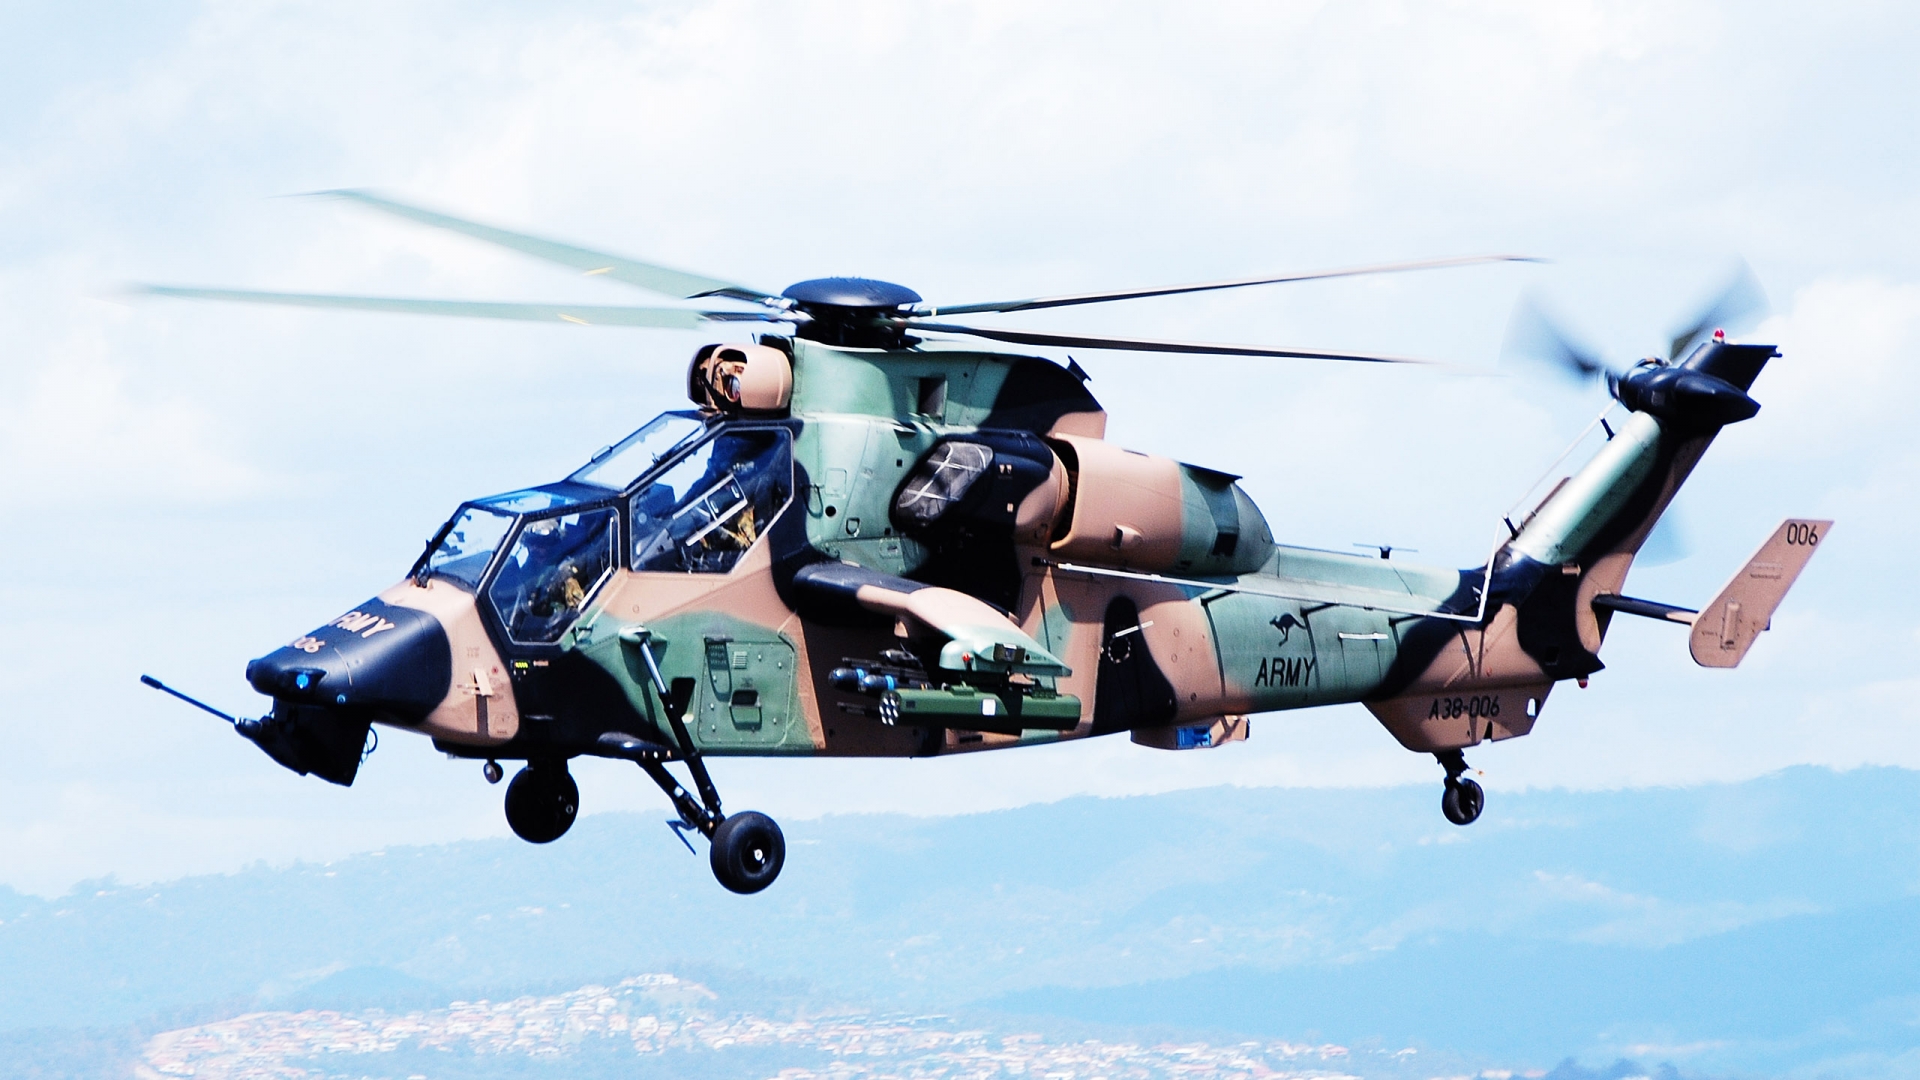 eurocopter, Attack, Helicopter, Military, Weapon, Guns, Flight Wallpaper